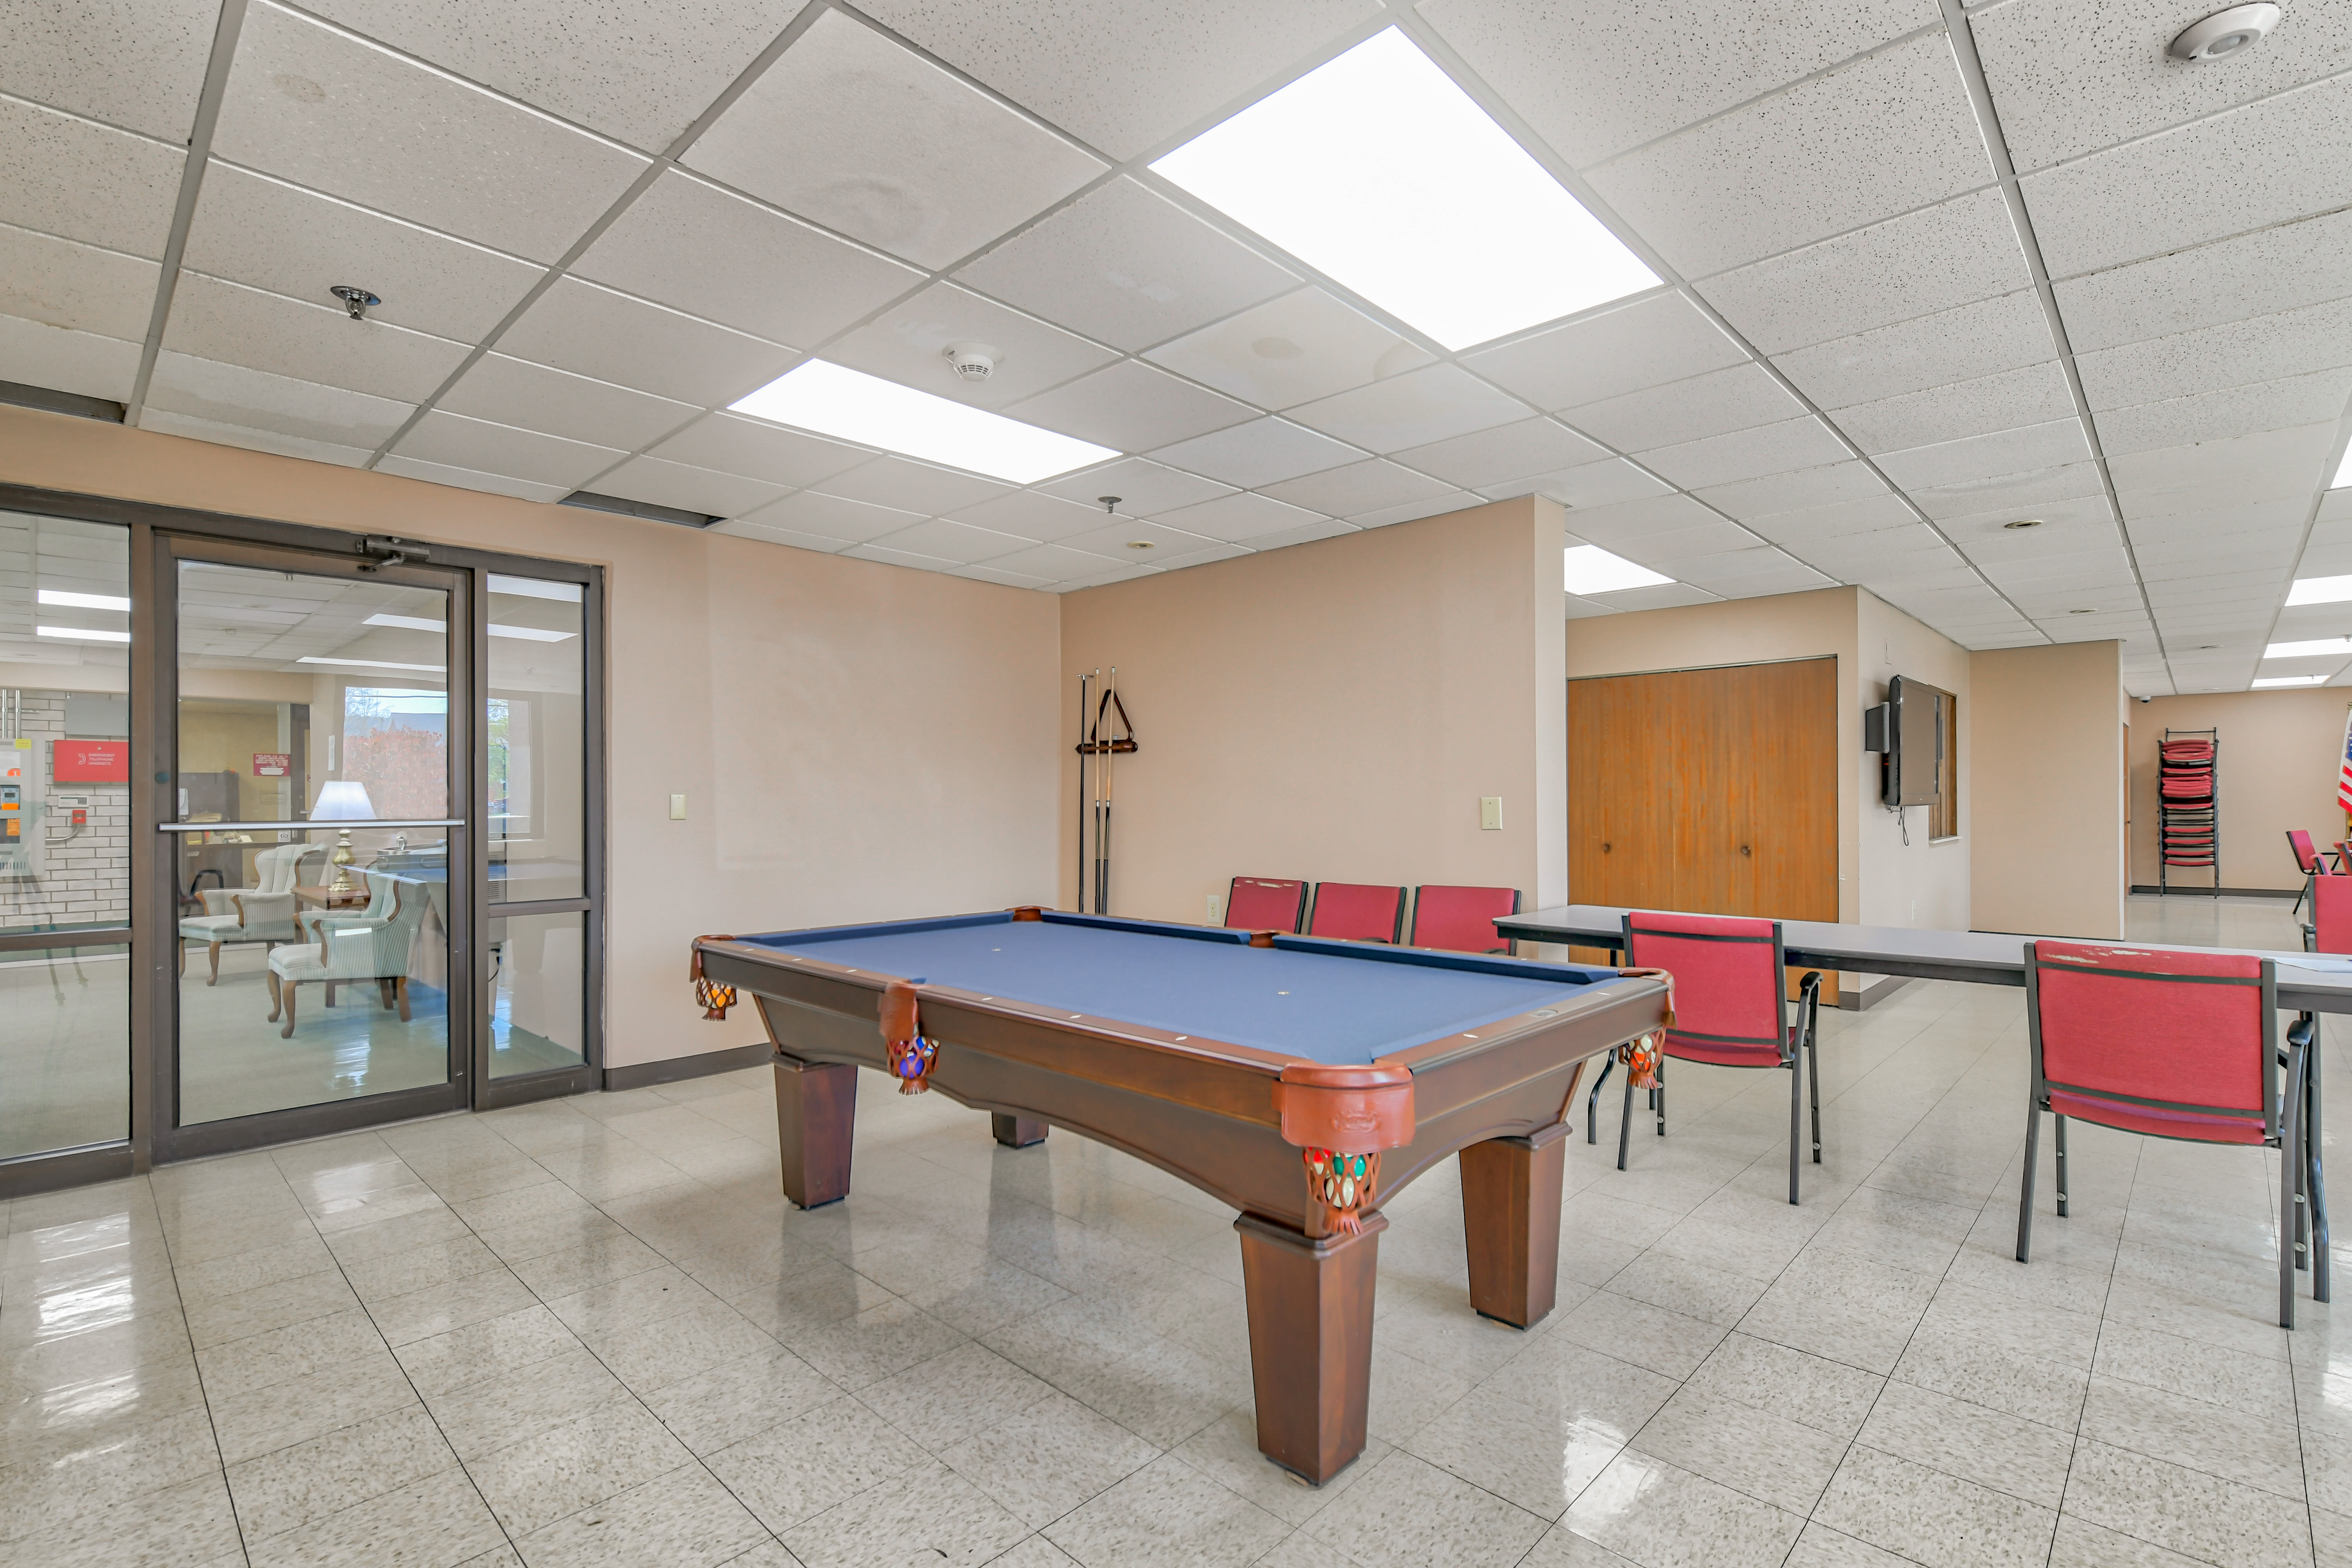 Pool table in the recreation center at Citizen's Plaza in New Kensington, Pennsylvania